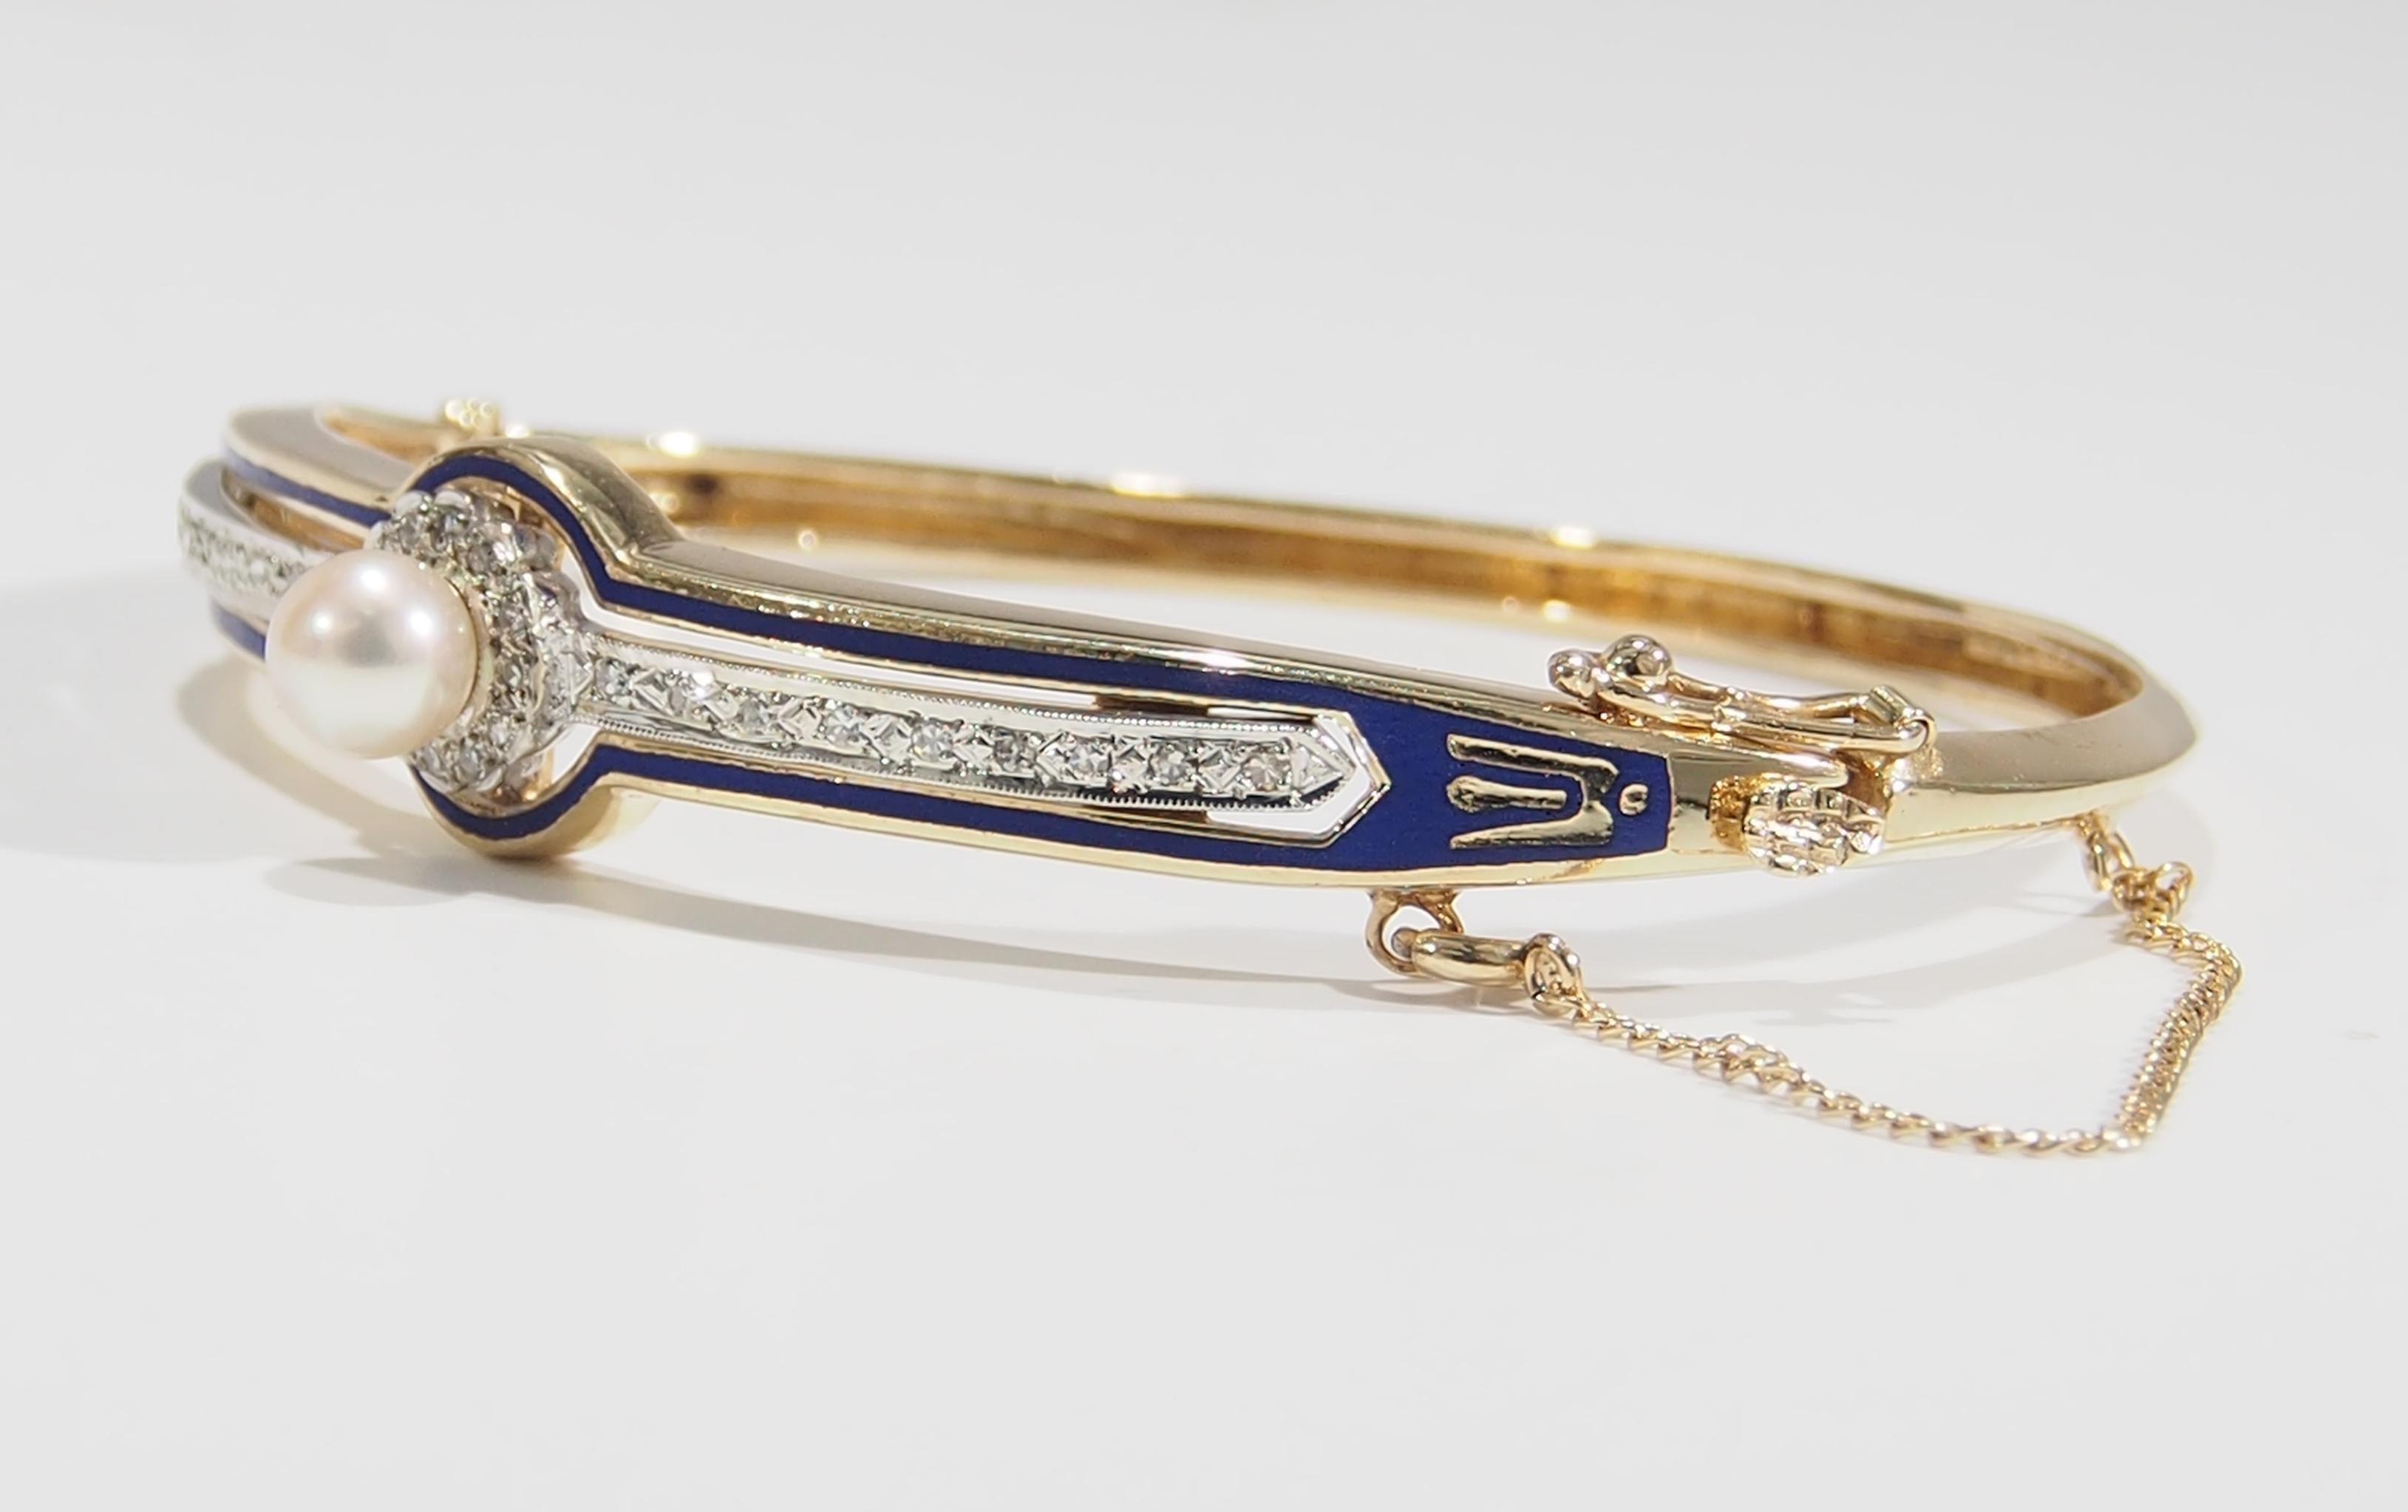 This is an intriguing 14K Yellow Gold Bangle Bracelet fashioned in the Victorian Period with Diamonds and Pearl. The classic design has cobalt blue Enamel with a delicate line of (30) Single Cut Diamonds, approximately 0.30ctw, I-K in Color, VS-SI